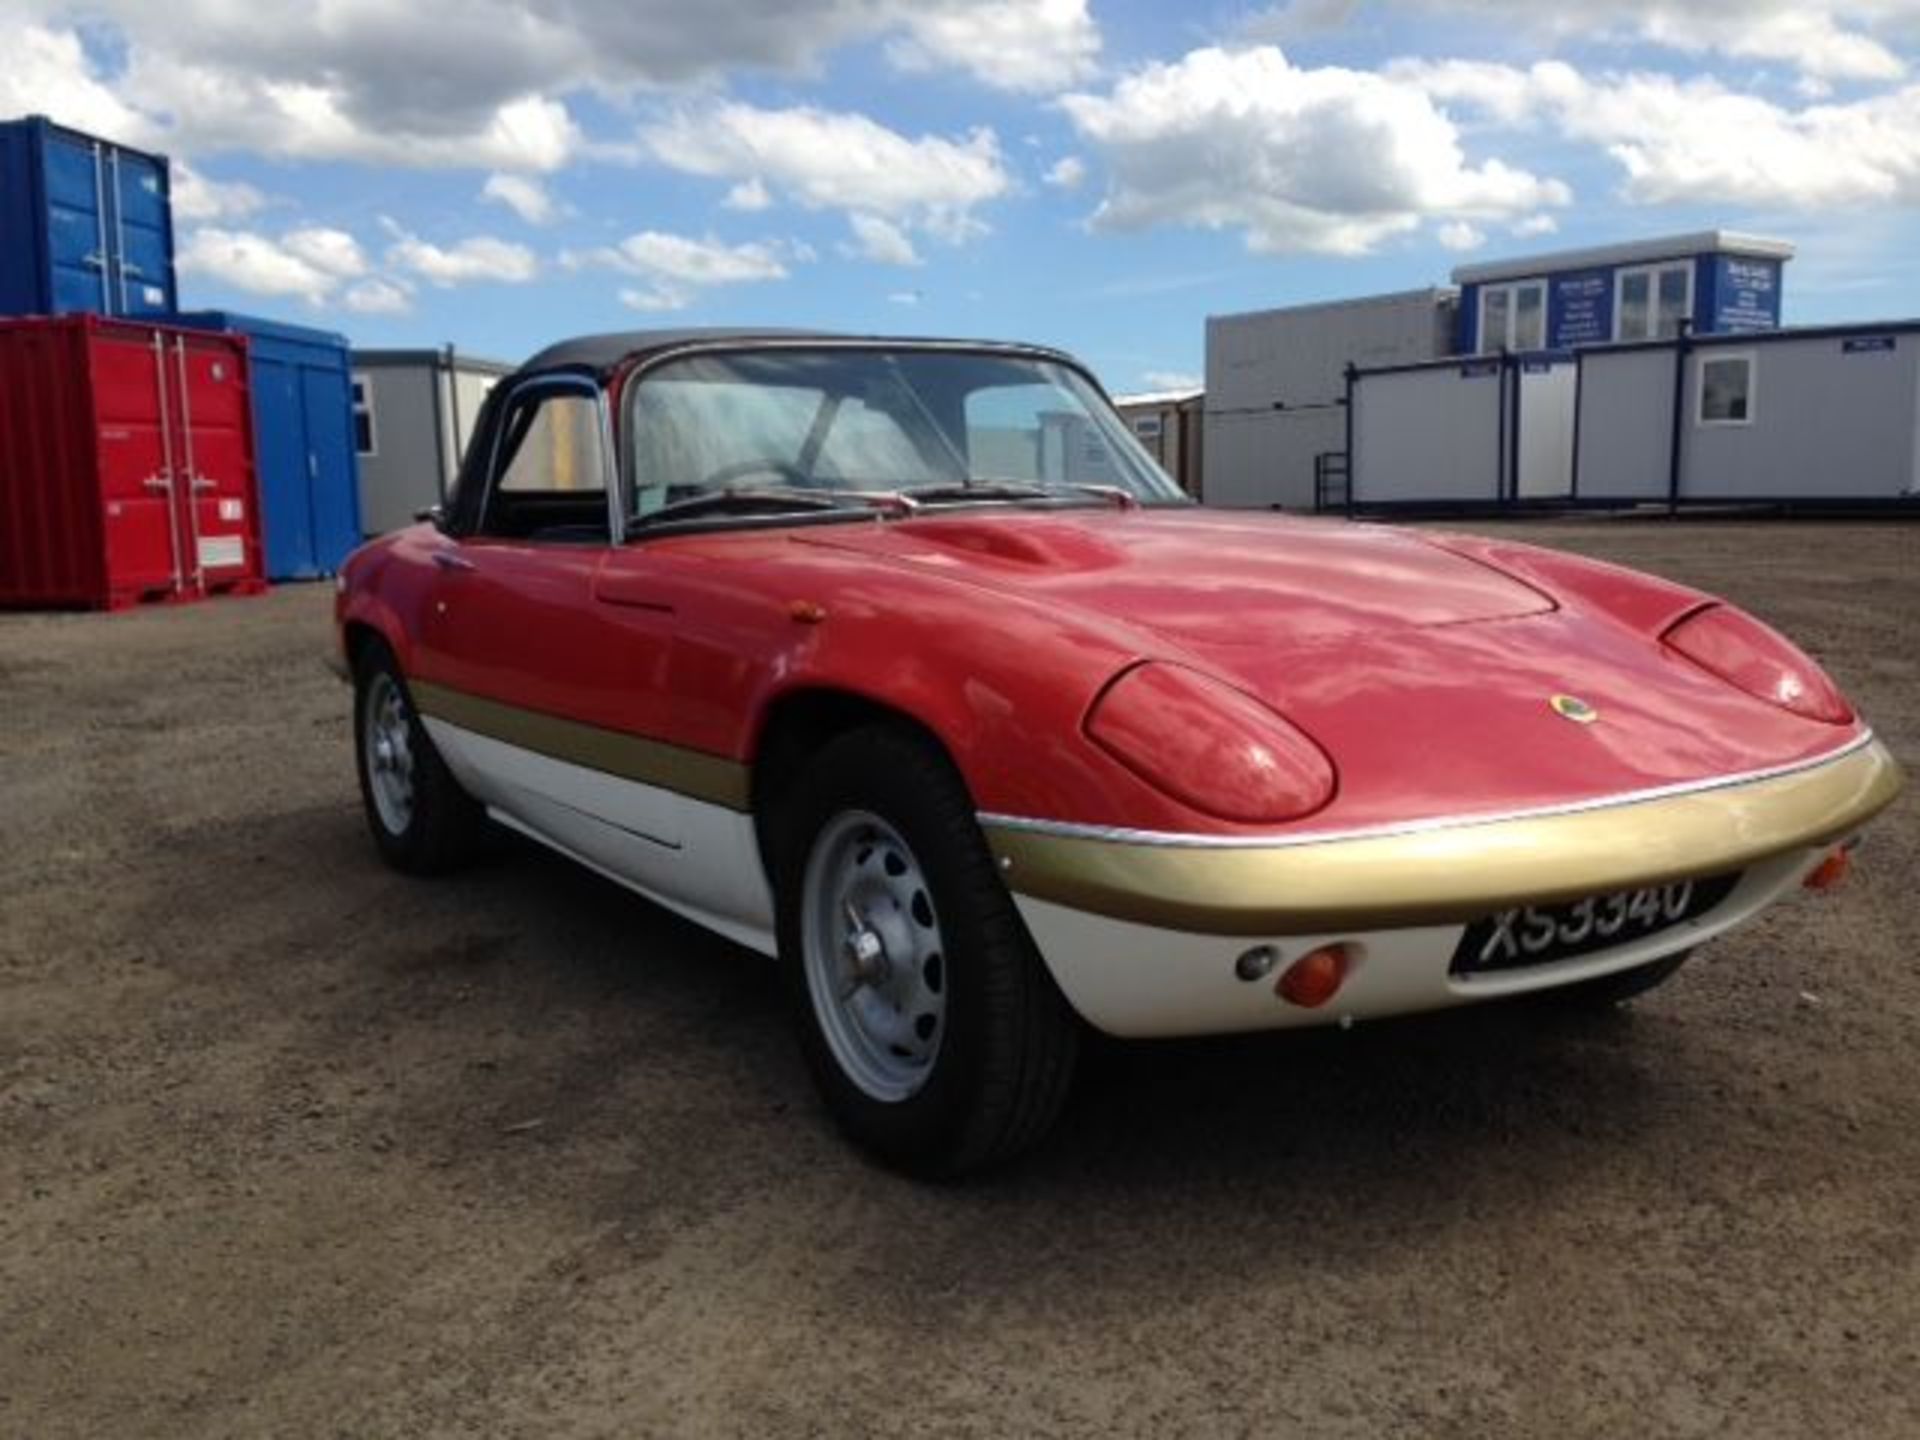 LOTUS, ELAN SERIES 4 - 1588cc, Chassis number 7002050018C - presented with an MOT test certificate